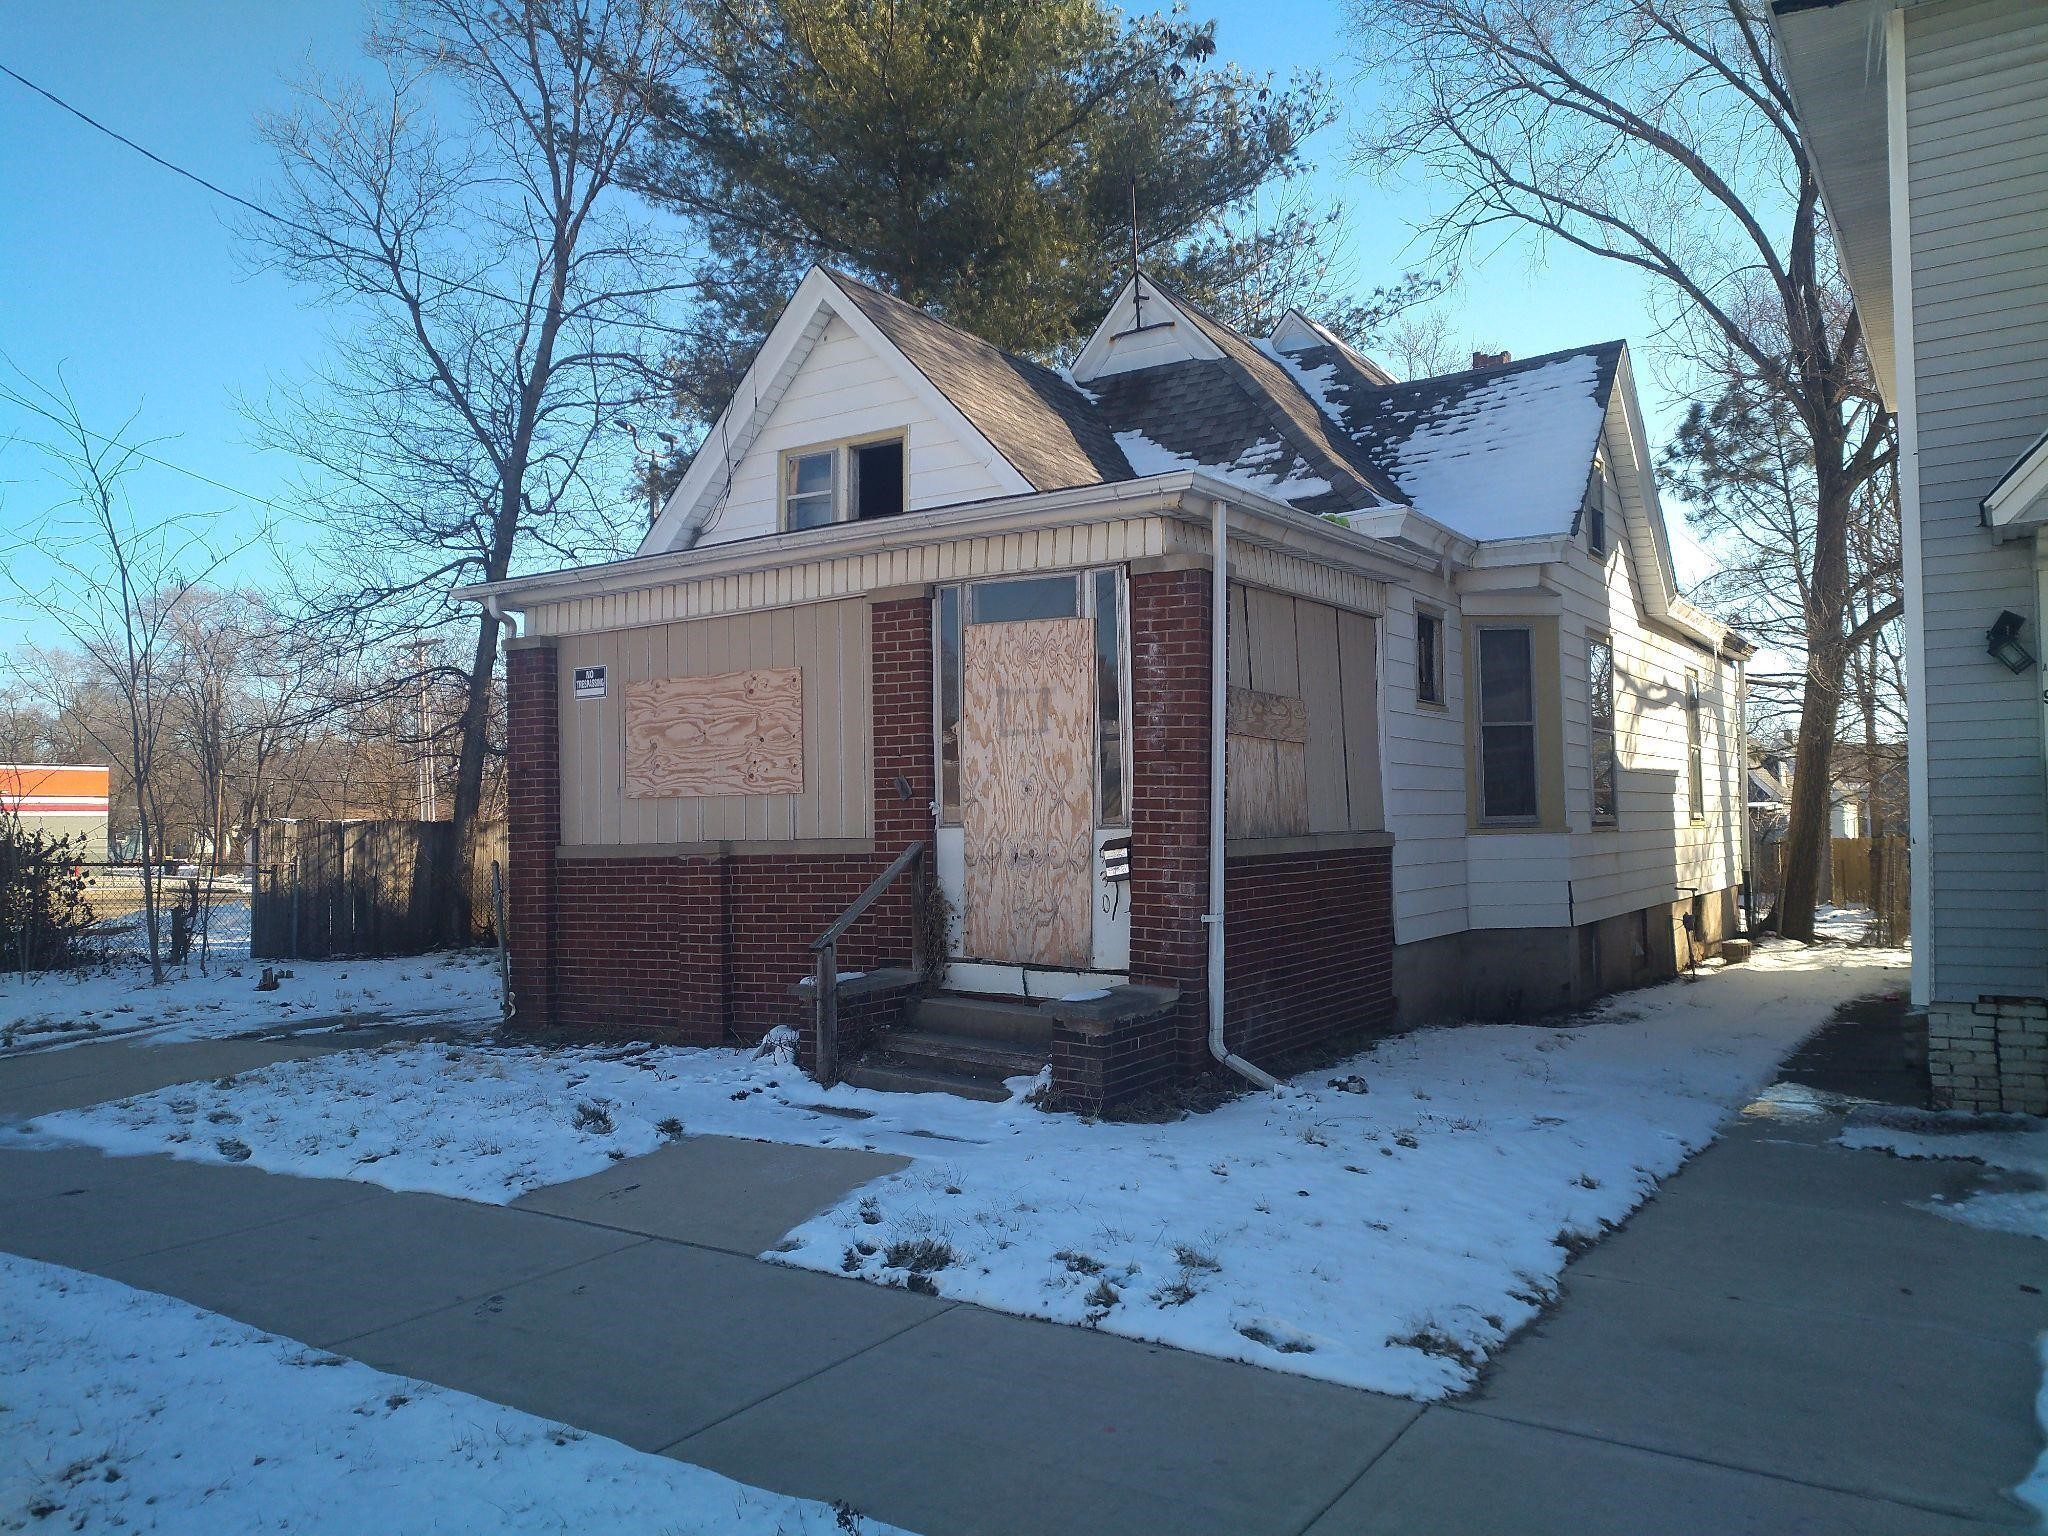 Investment Property in Peoria, IL